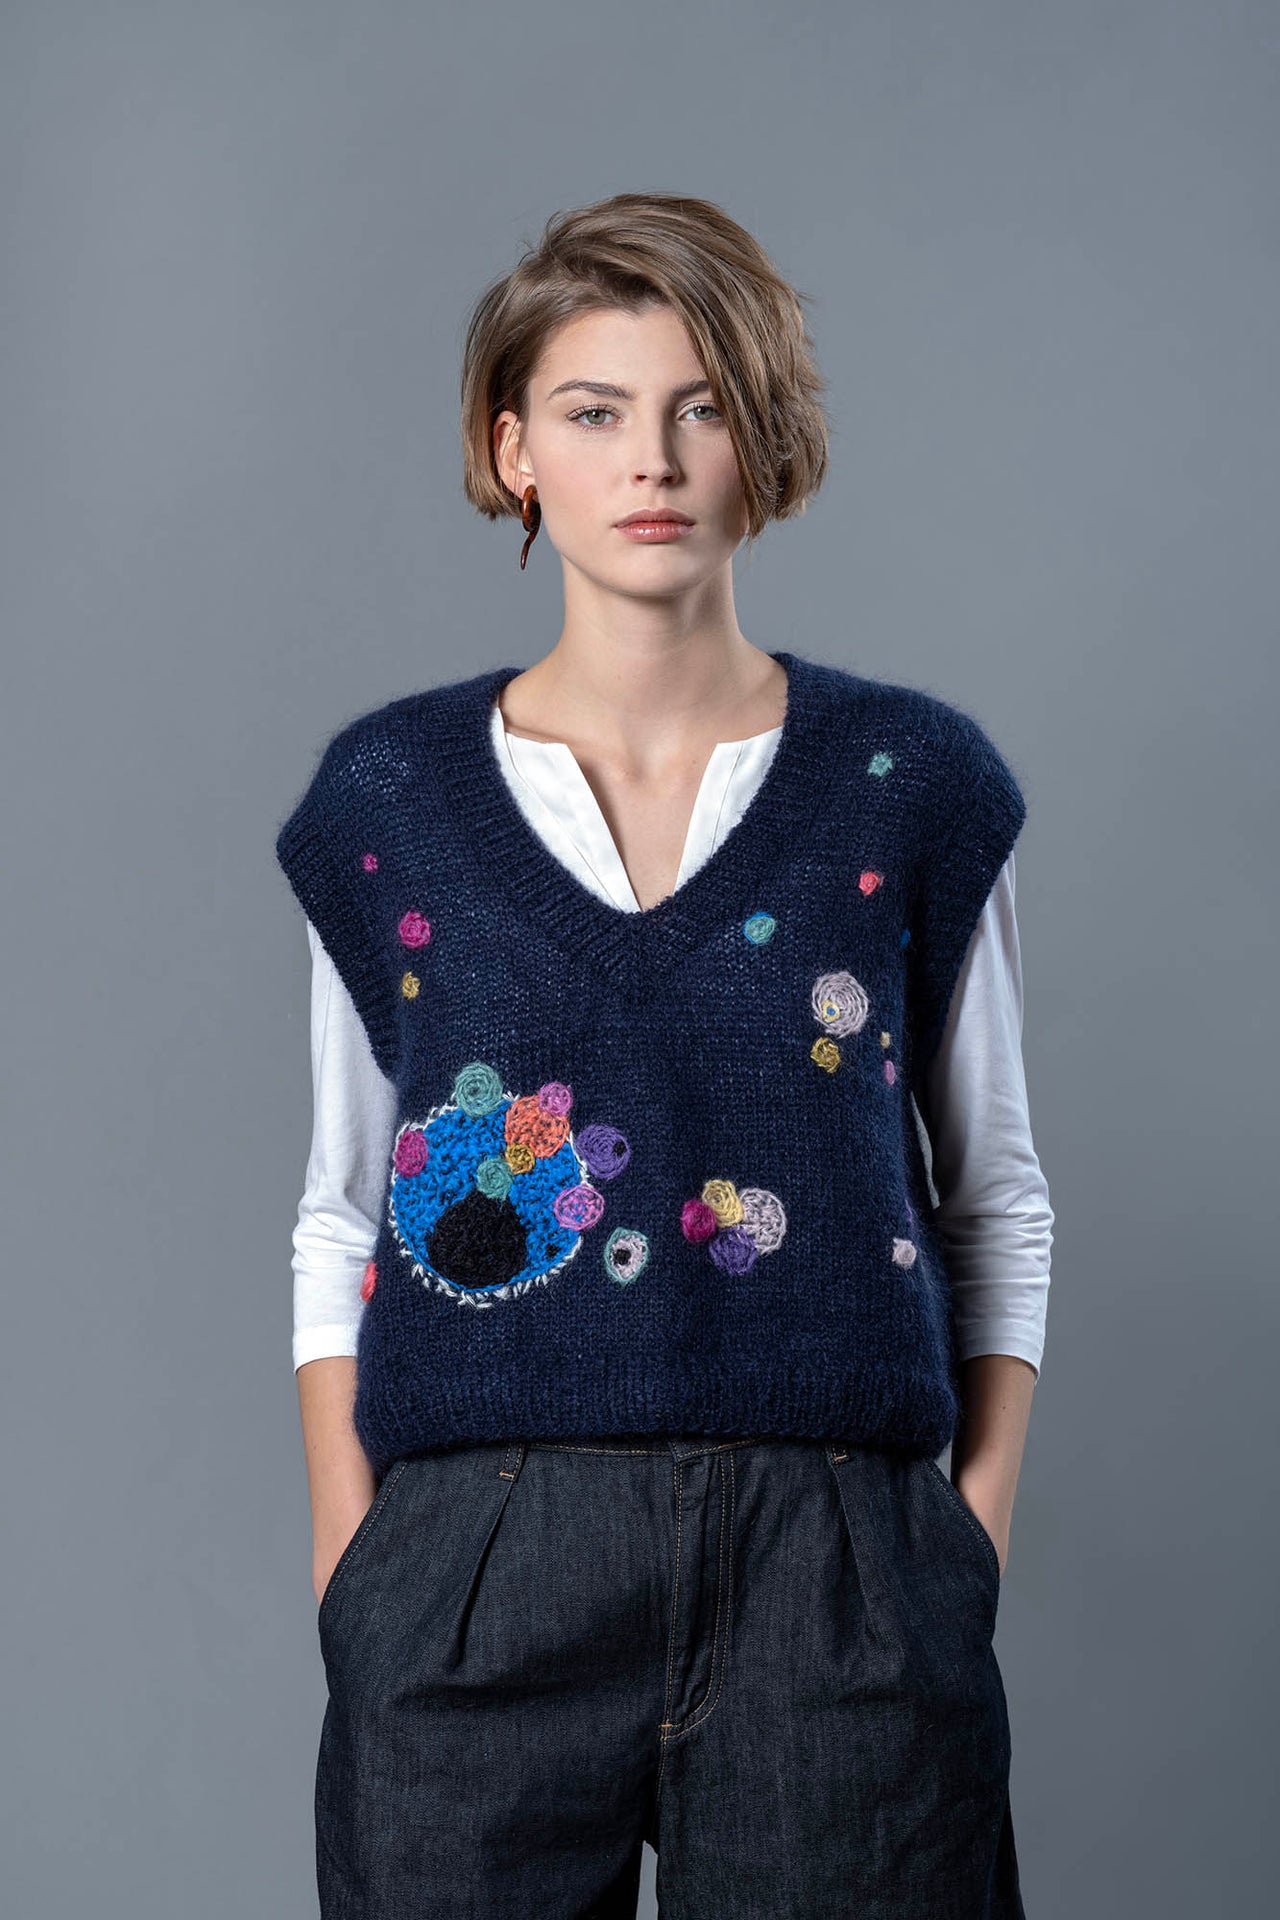 Woman wearing mohair navy vest. The vest is adorned with abstract star-like colourful embroideries 